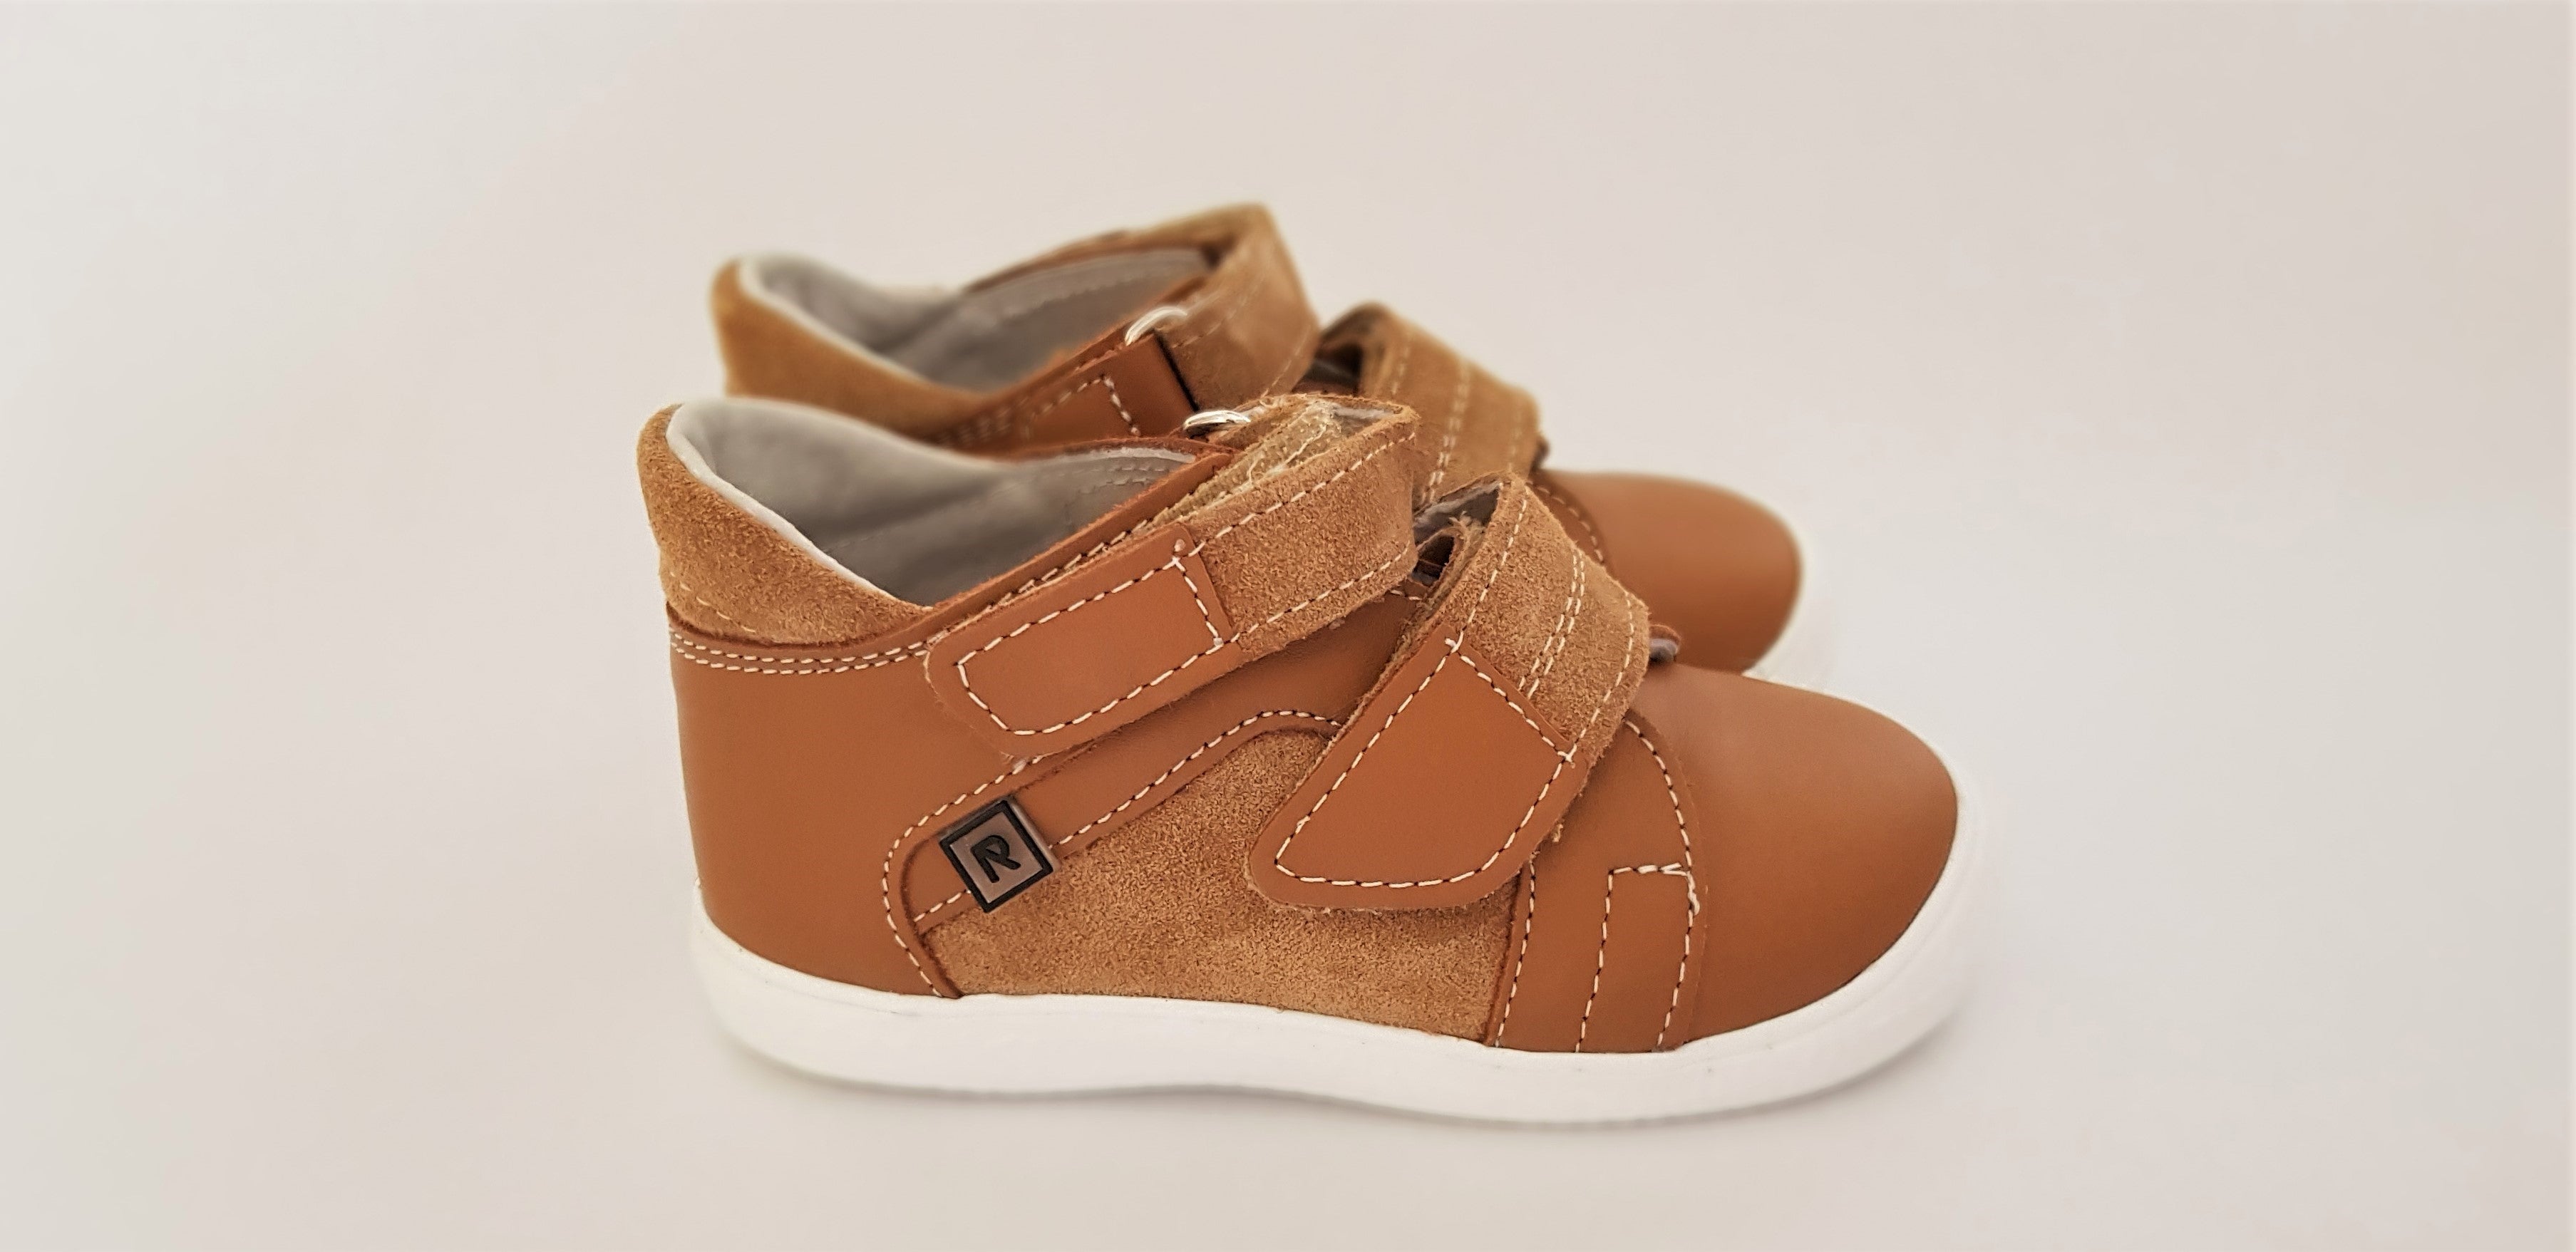 Light Brown Handmade Soft Leather Children's Shoes with hook-and-loop fasteners, round toe box and white sole